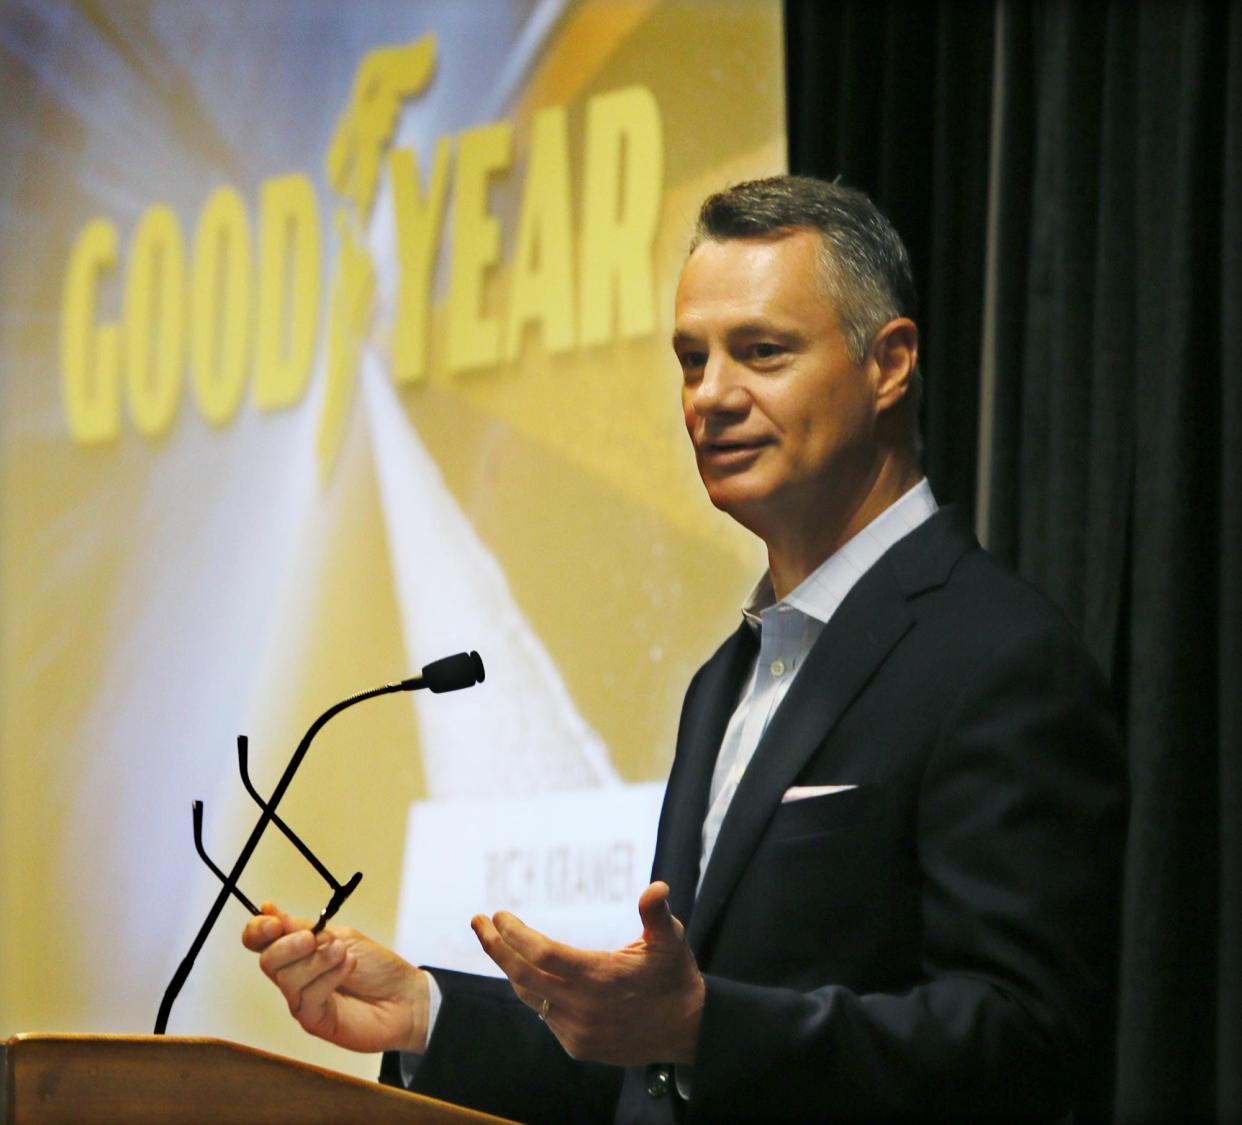 Richard J. Kramer, the former chairman and CEO of Goodyear Tire & Rubber Co., has been selected to receive the 2024 H. Peter Burg Economic Development Leadership Award by the Greater Akron Chamber,